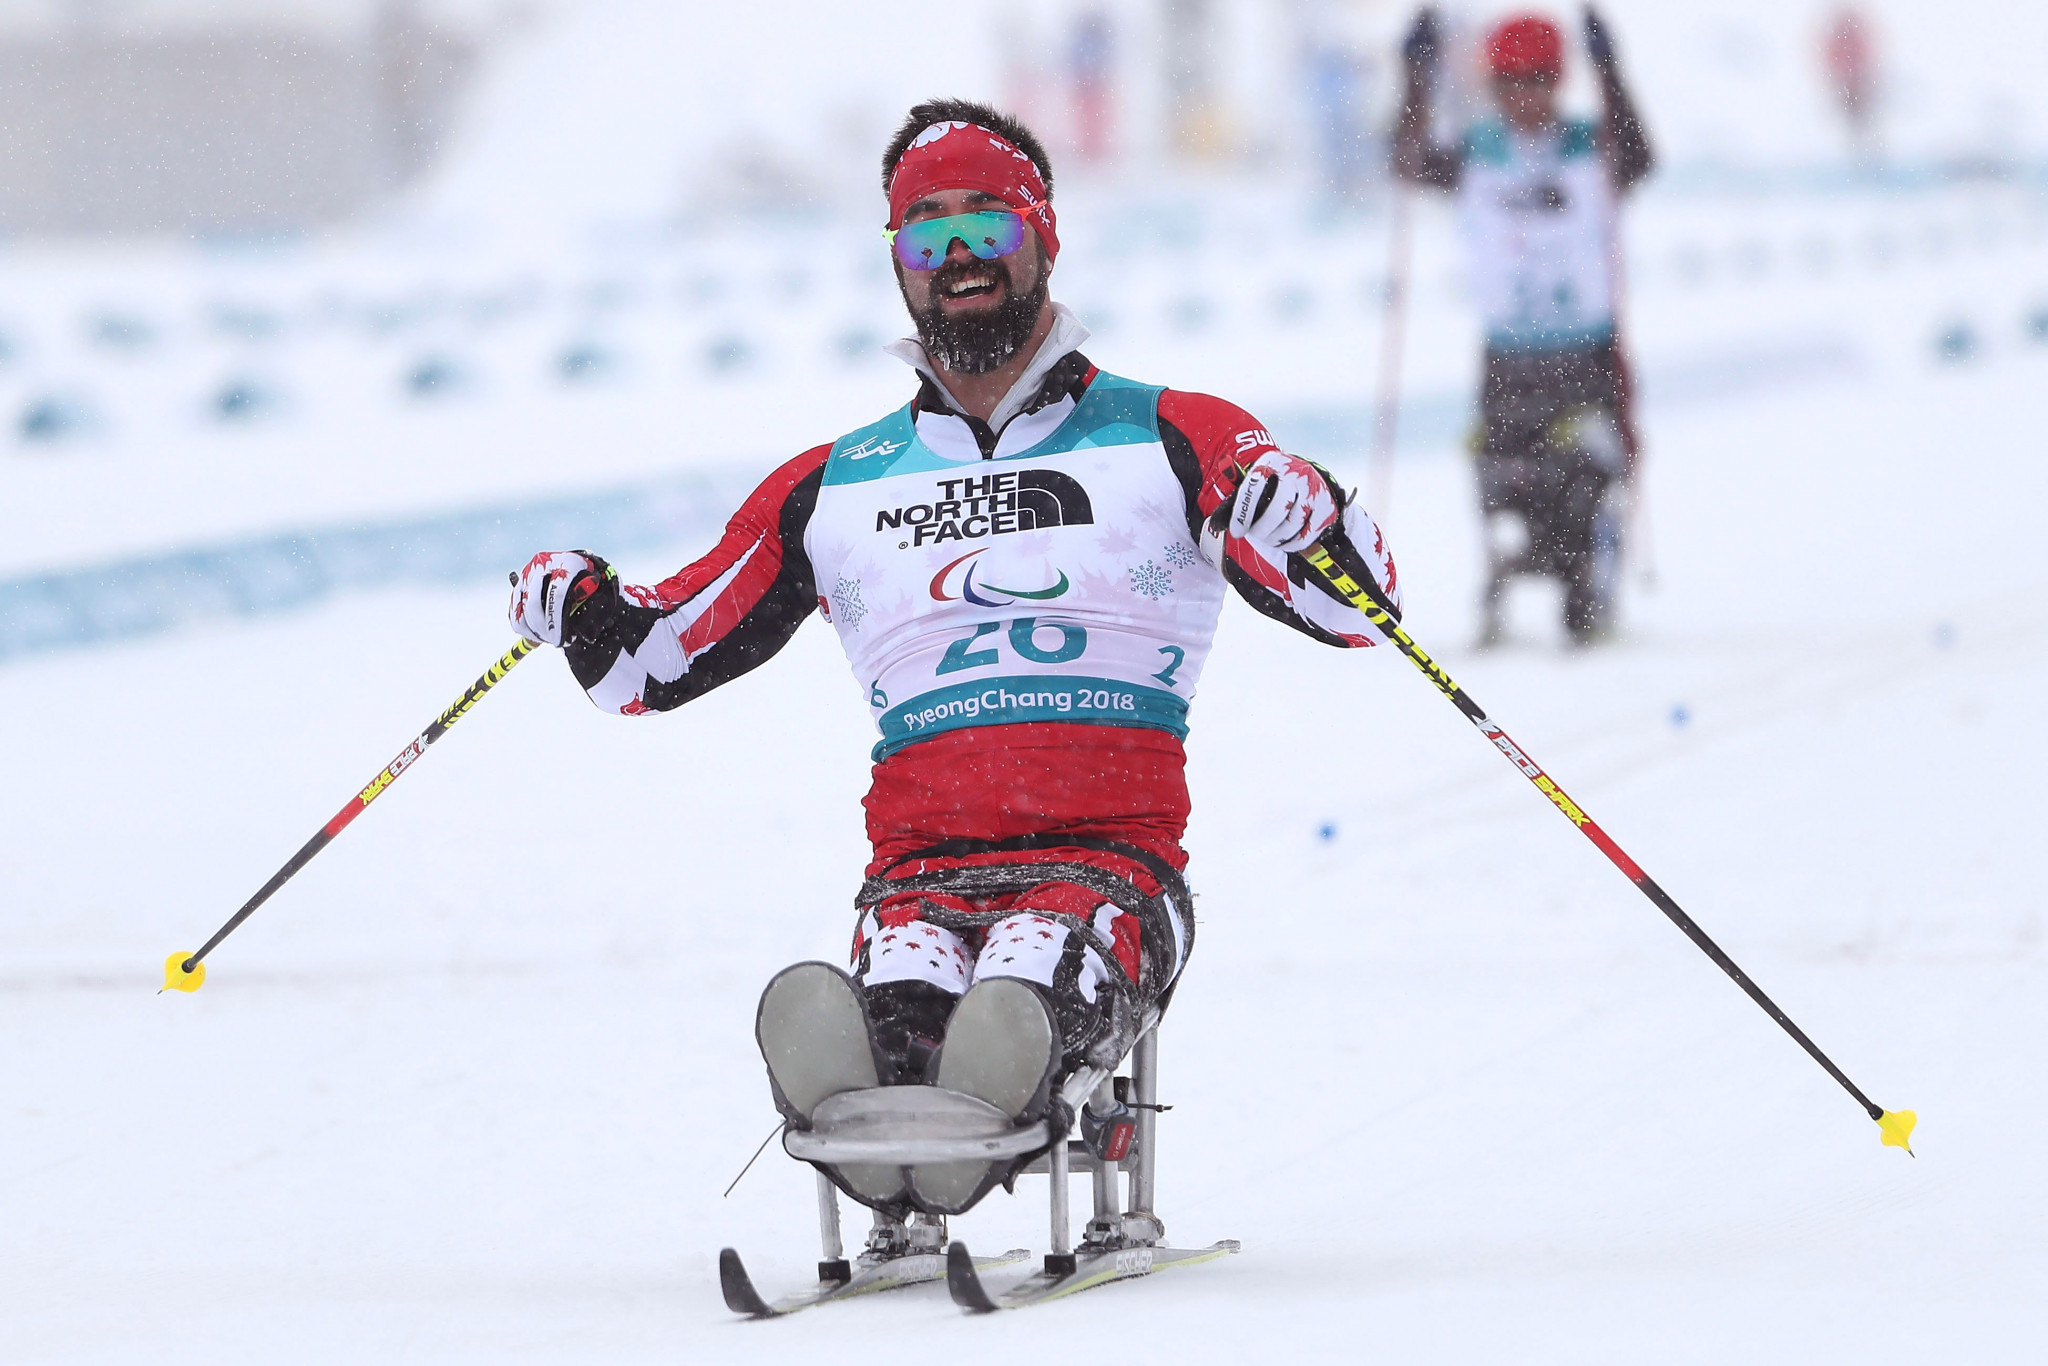 Canada's Collin Cameron is one of two Nordic skiers on the nominees list ©Getty Images